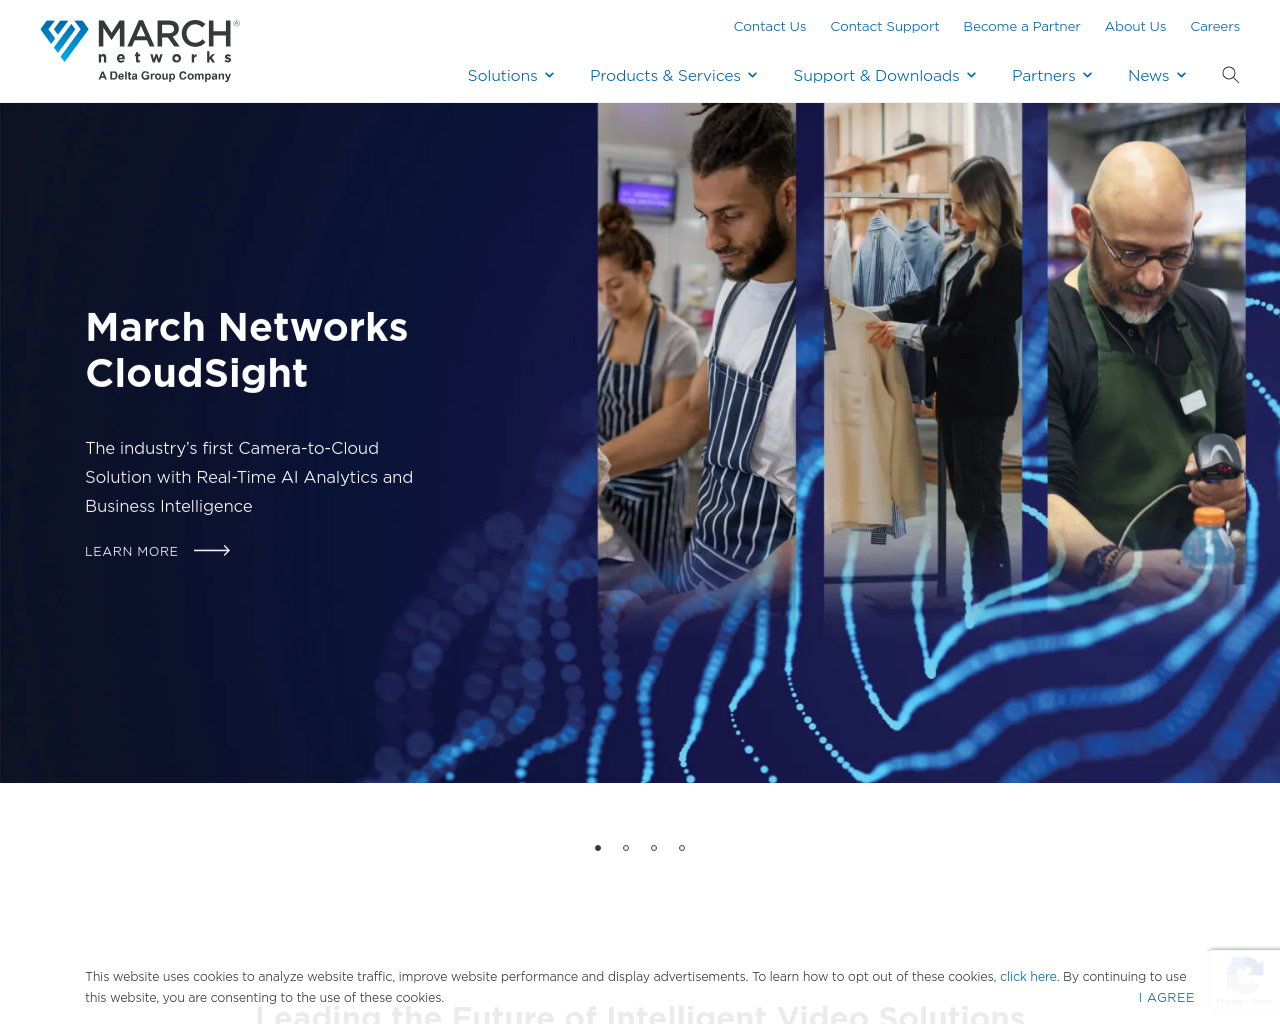 marchnetworks.com